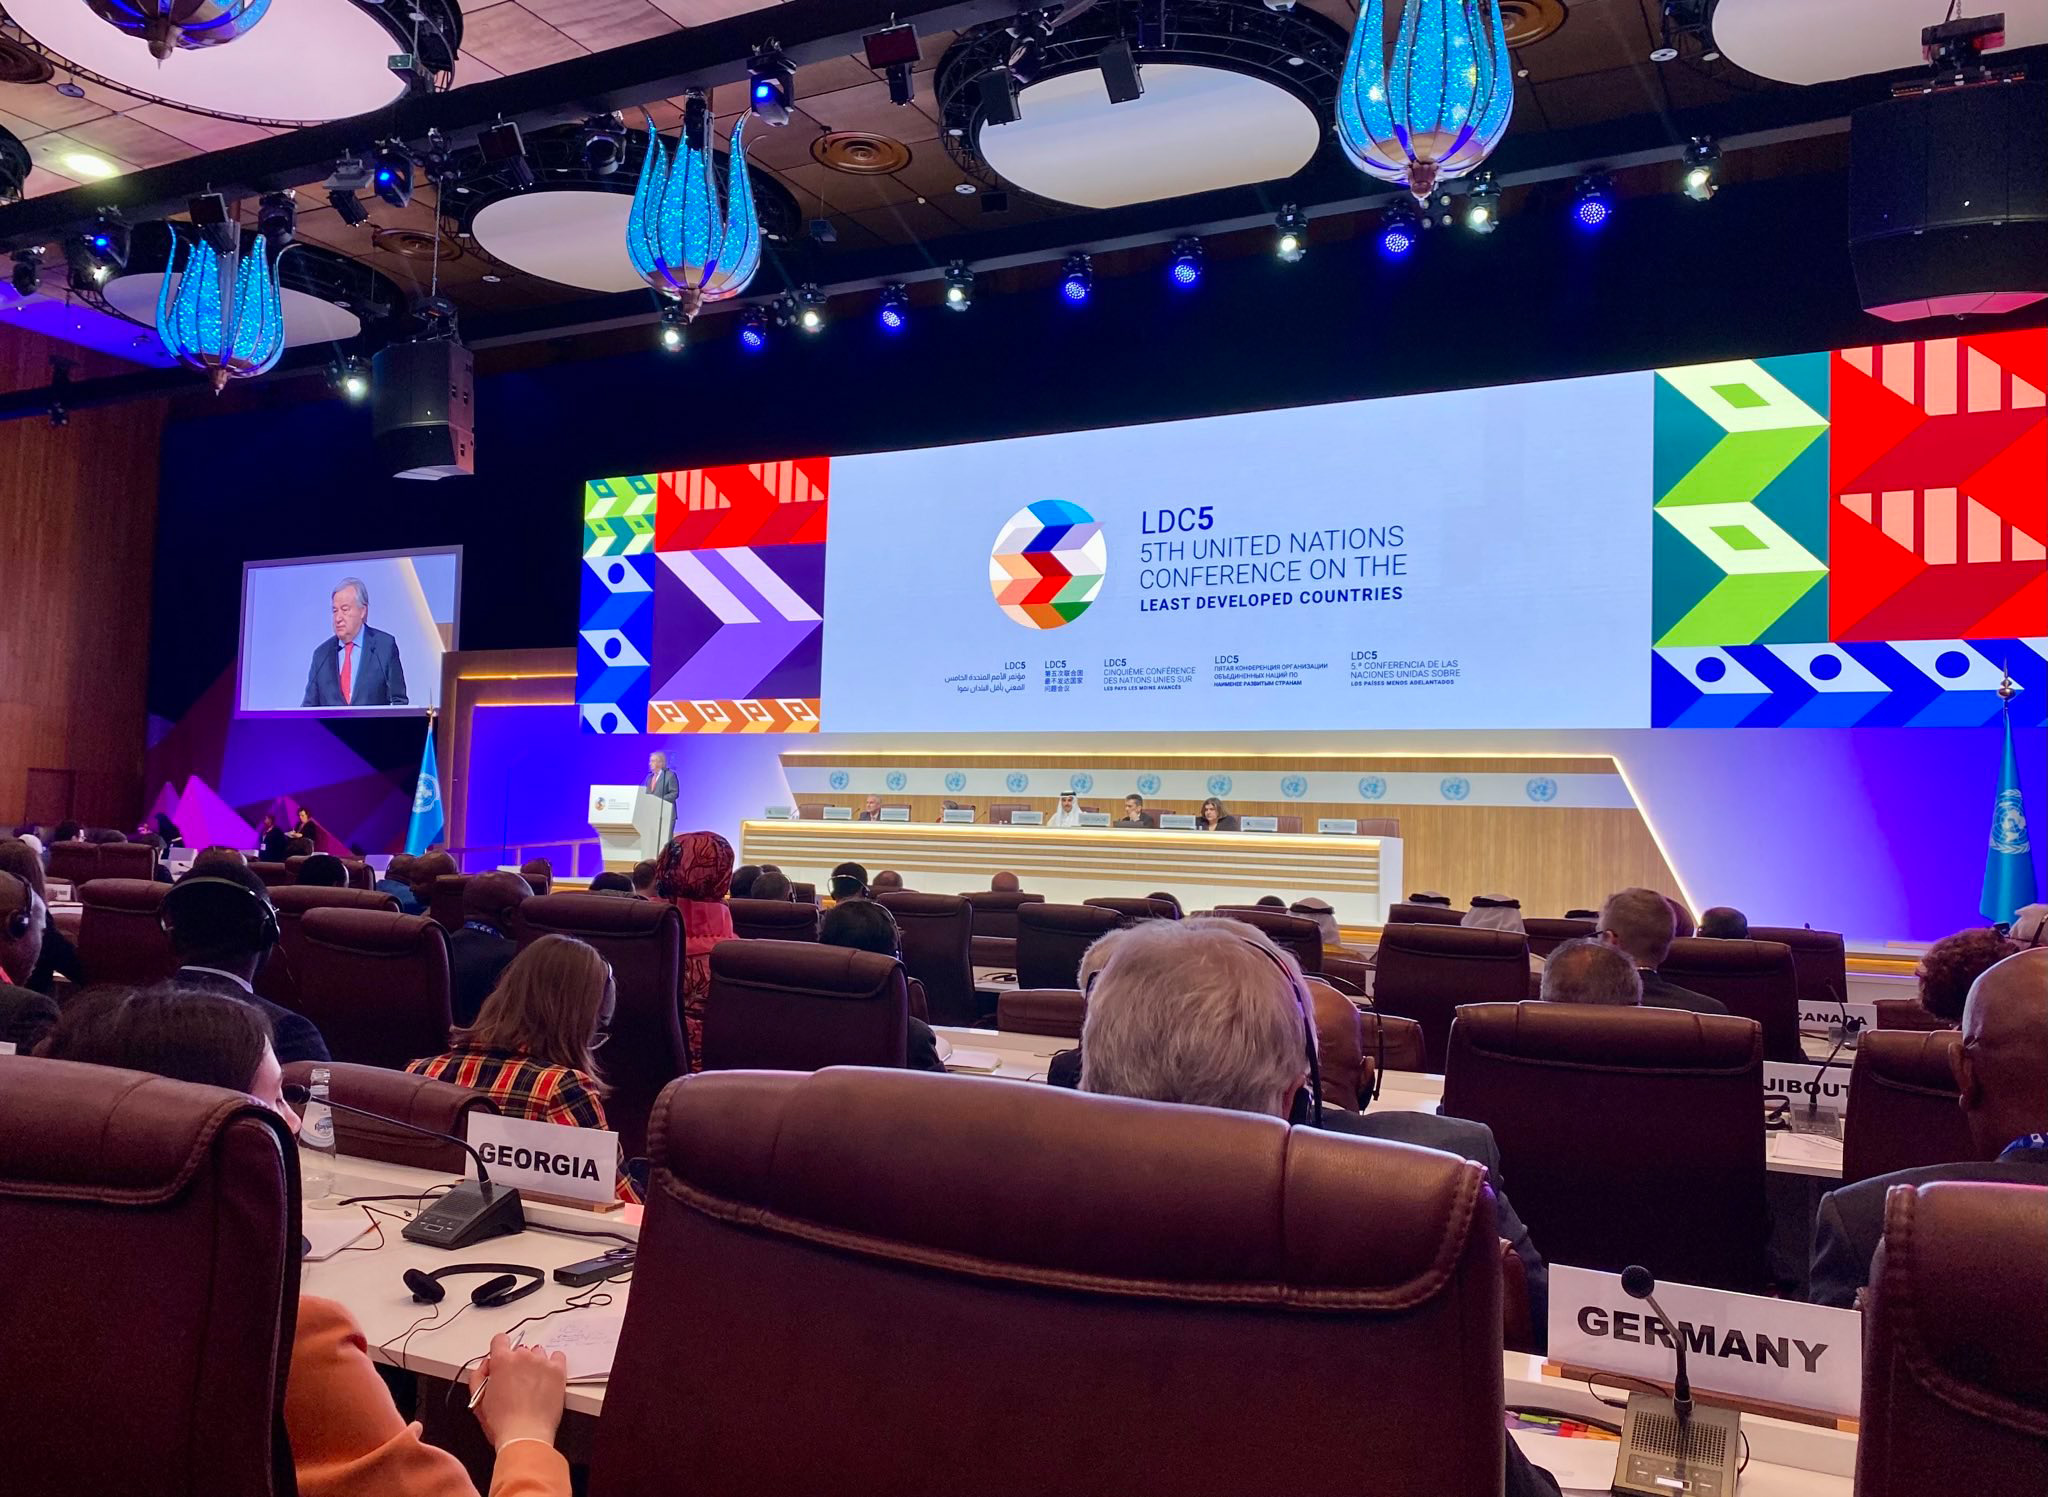 United Nations Secretary-General António Guterres at the opening of the Fifth United Nations Conference on the Least Developed Countries (LDC5) in Doha